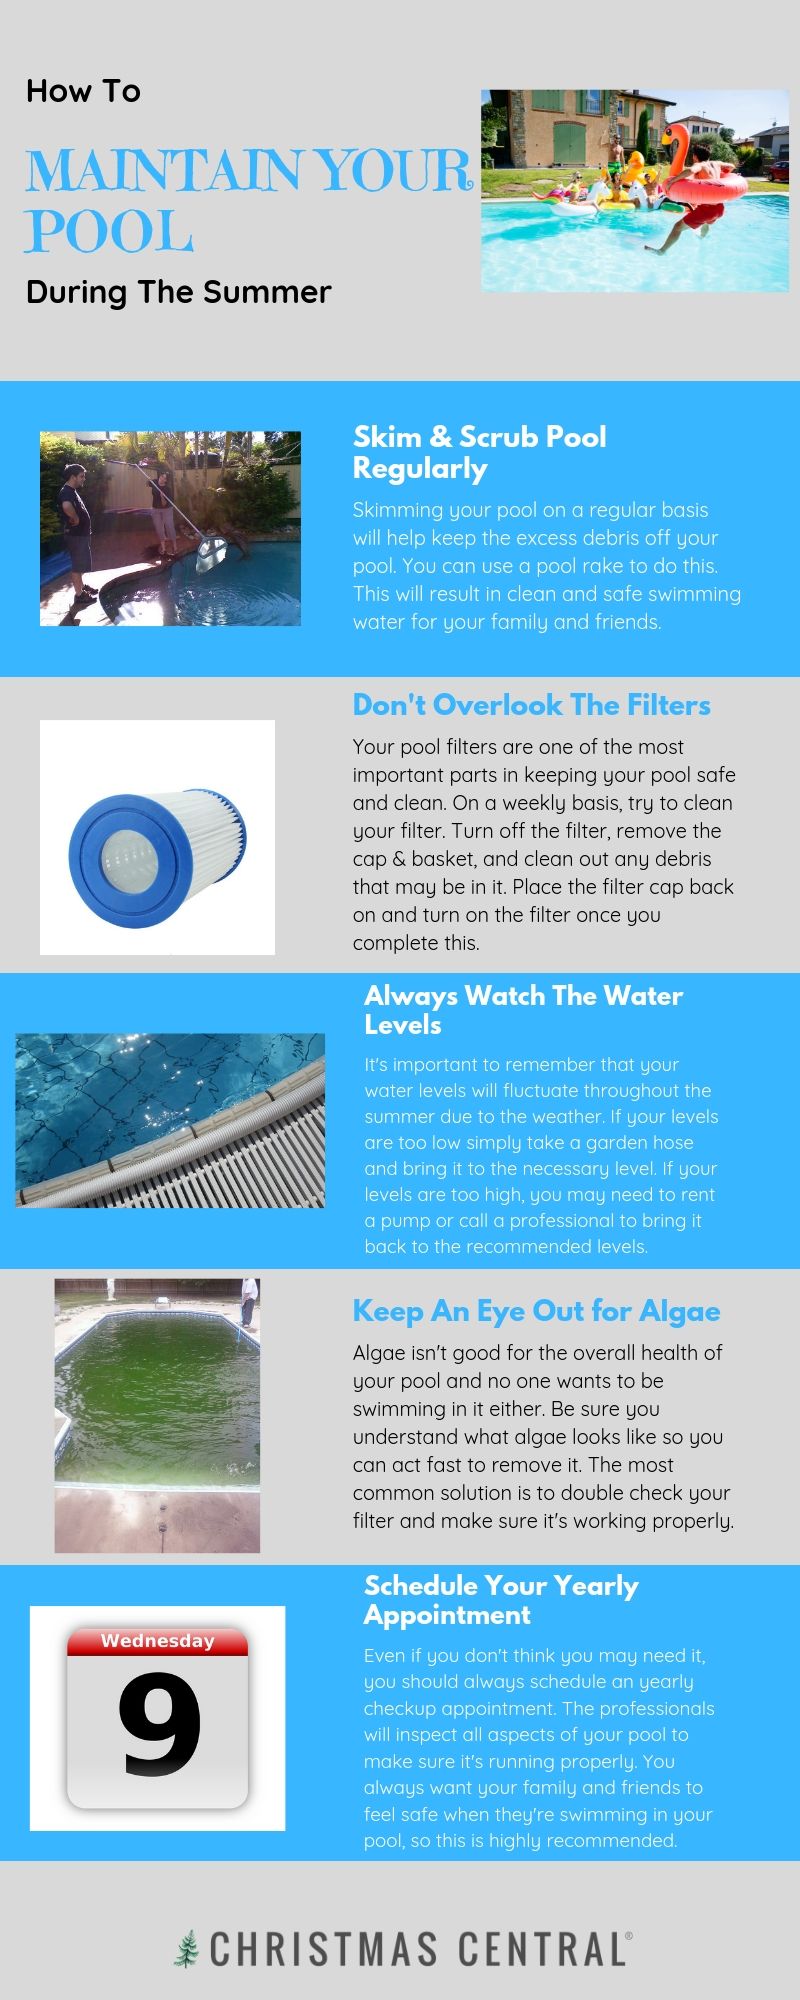 How To Maintain Your Pool